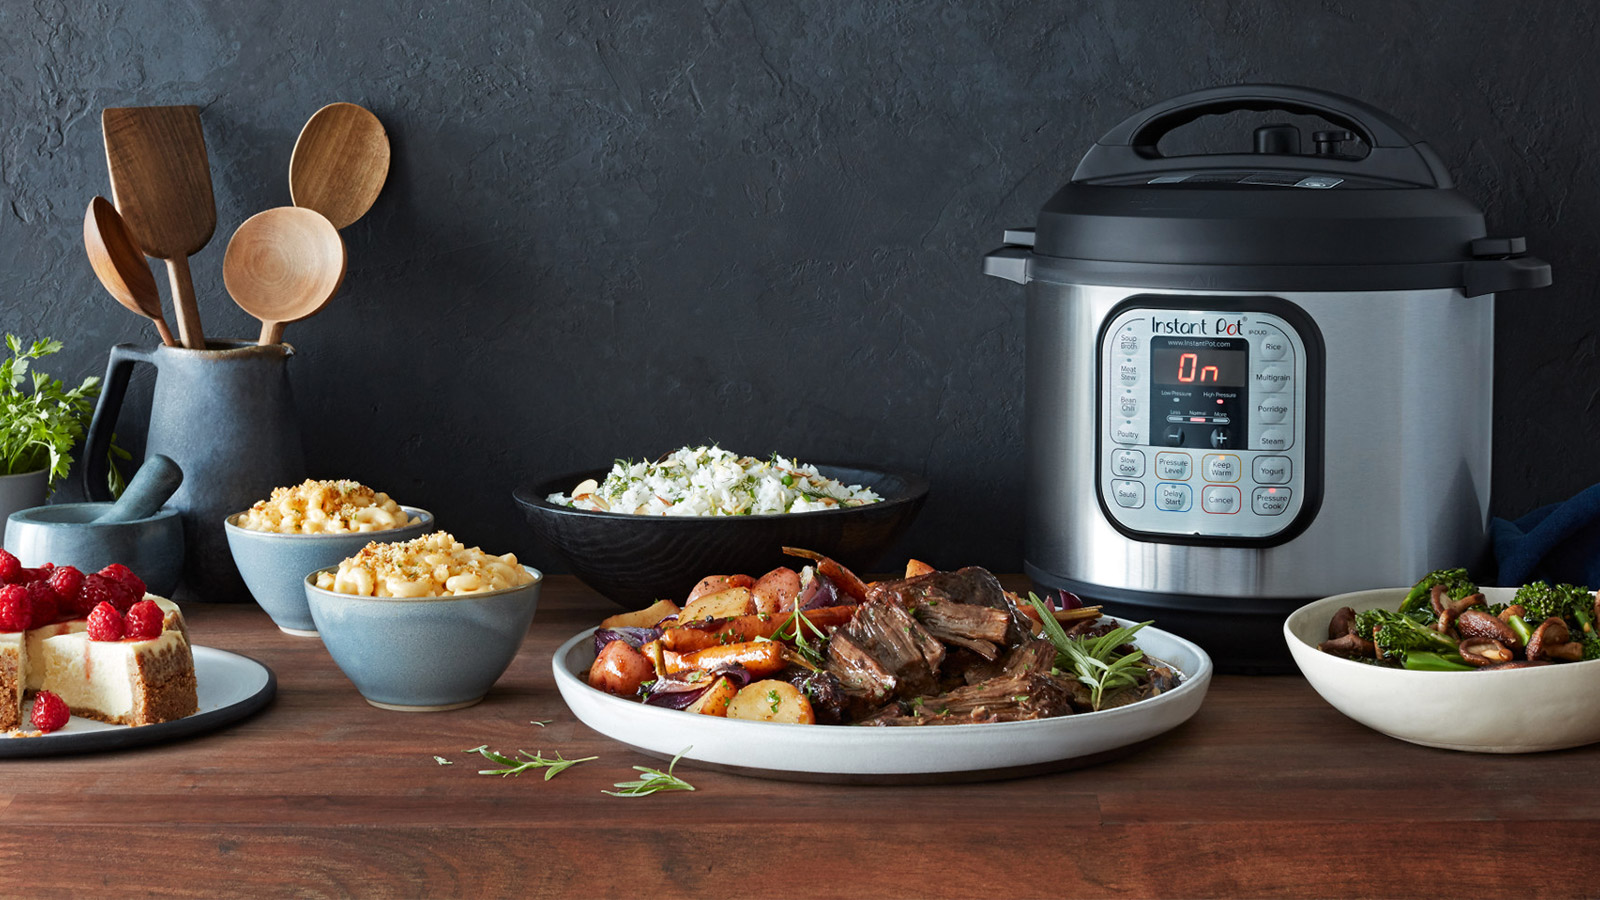 In this article are some other surprising ways you can use an Instant Pot o...